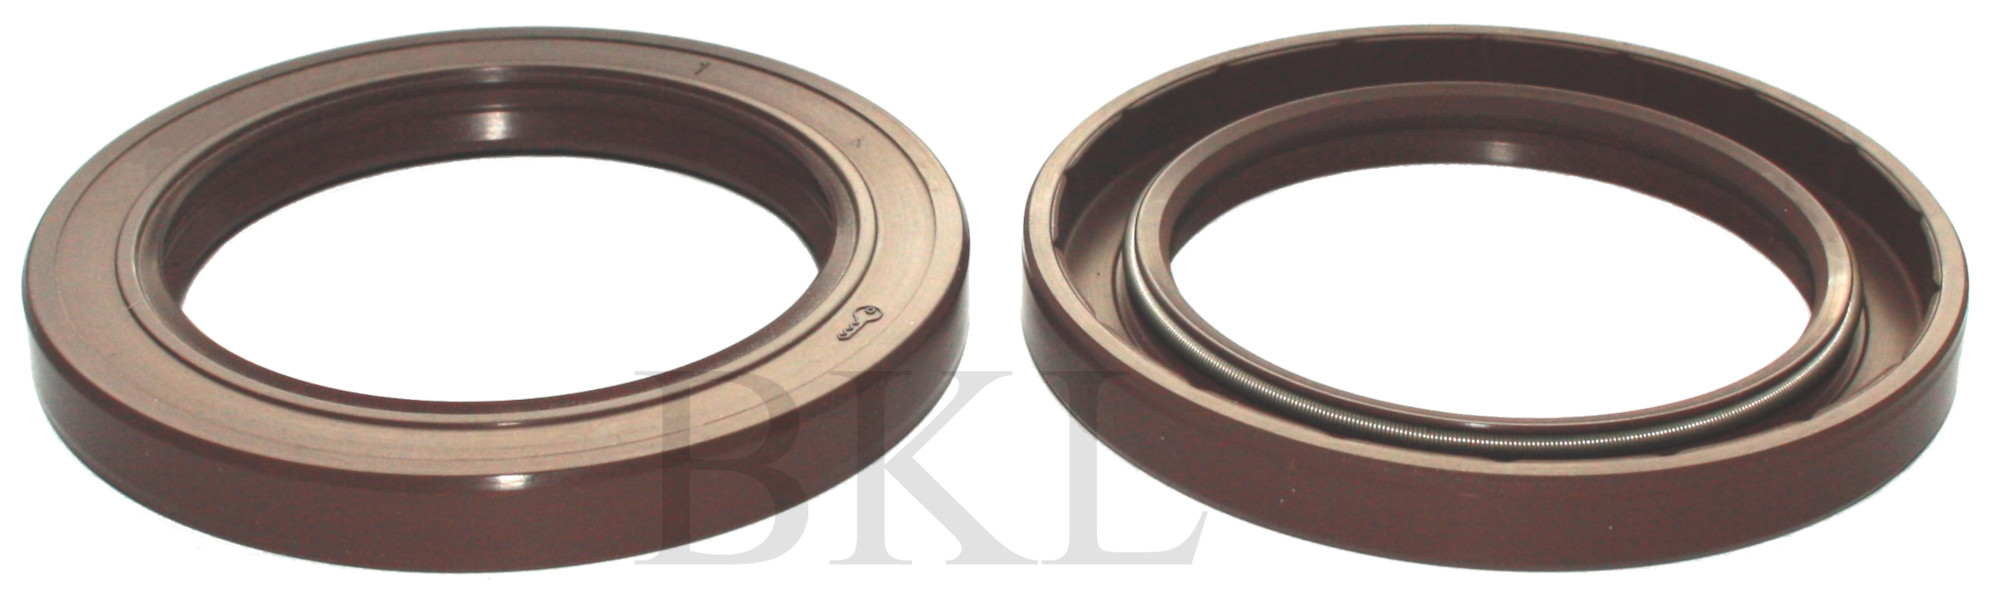 105x120x7mm R23/TC Double Lip Viton Rotary Shaft Oil Seal with Garter Spring image 2